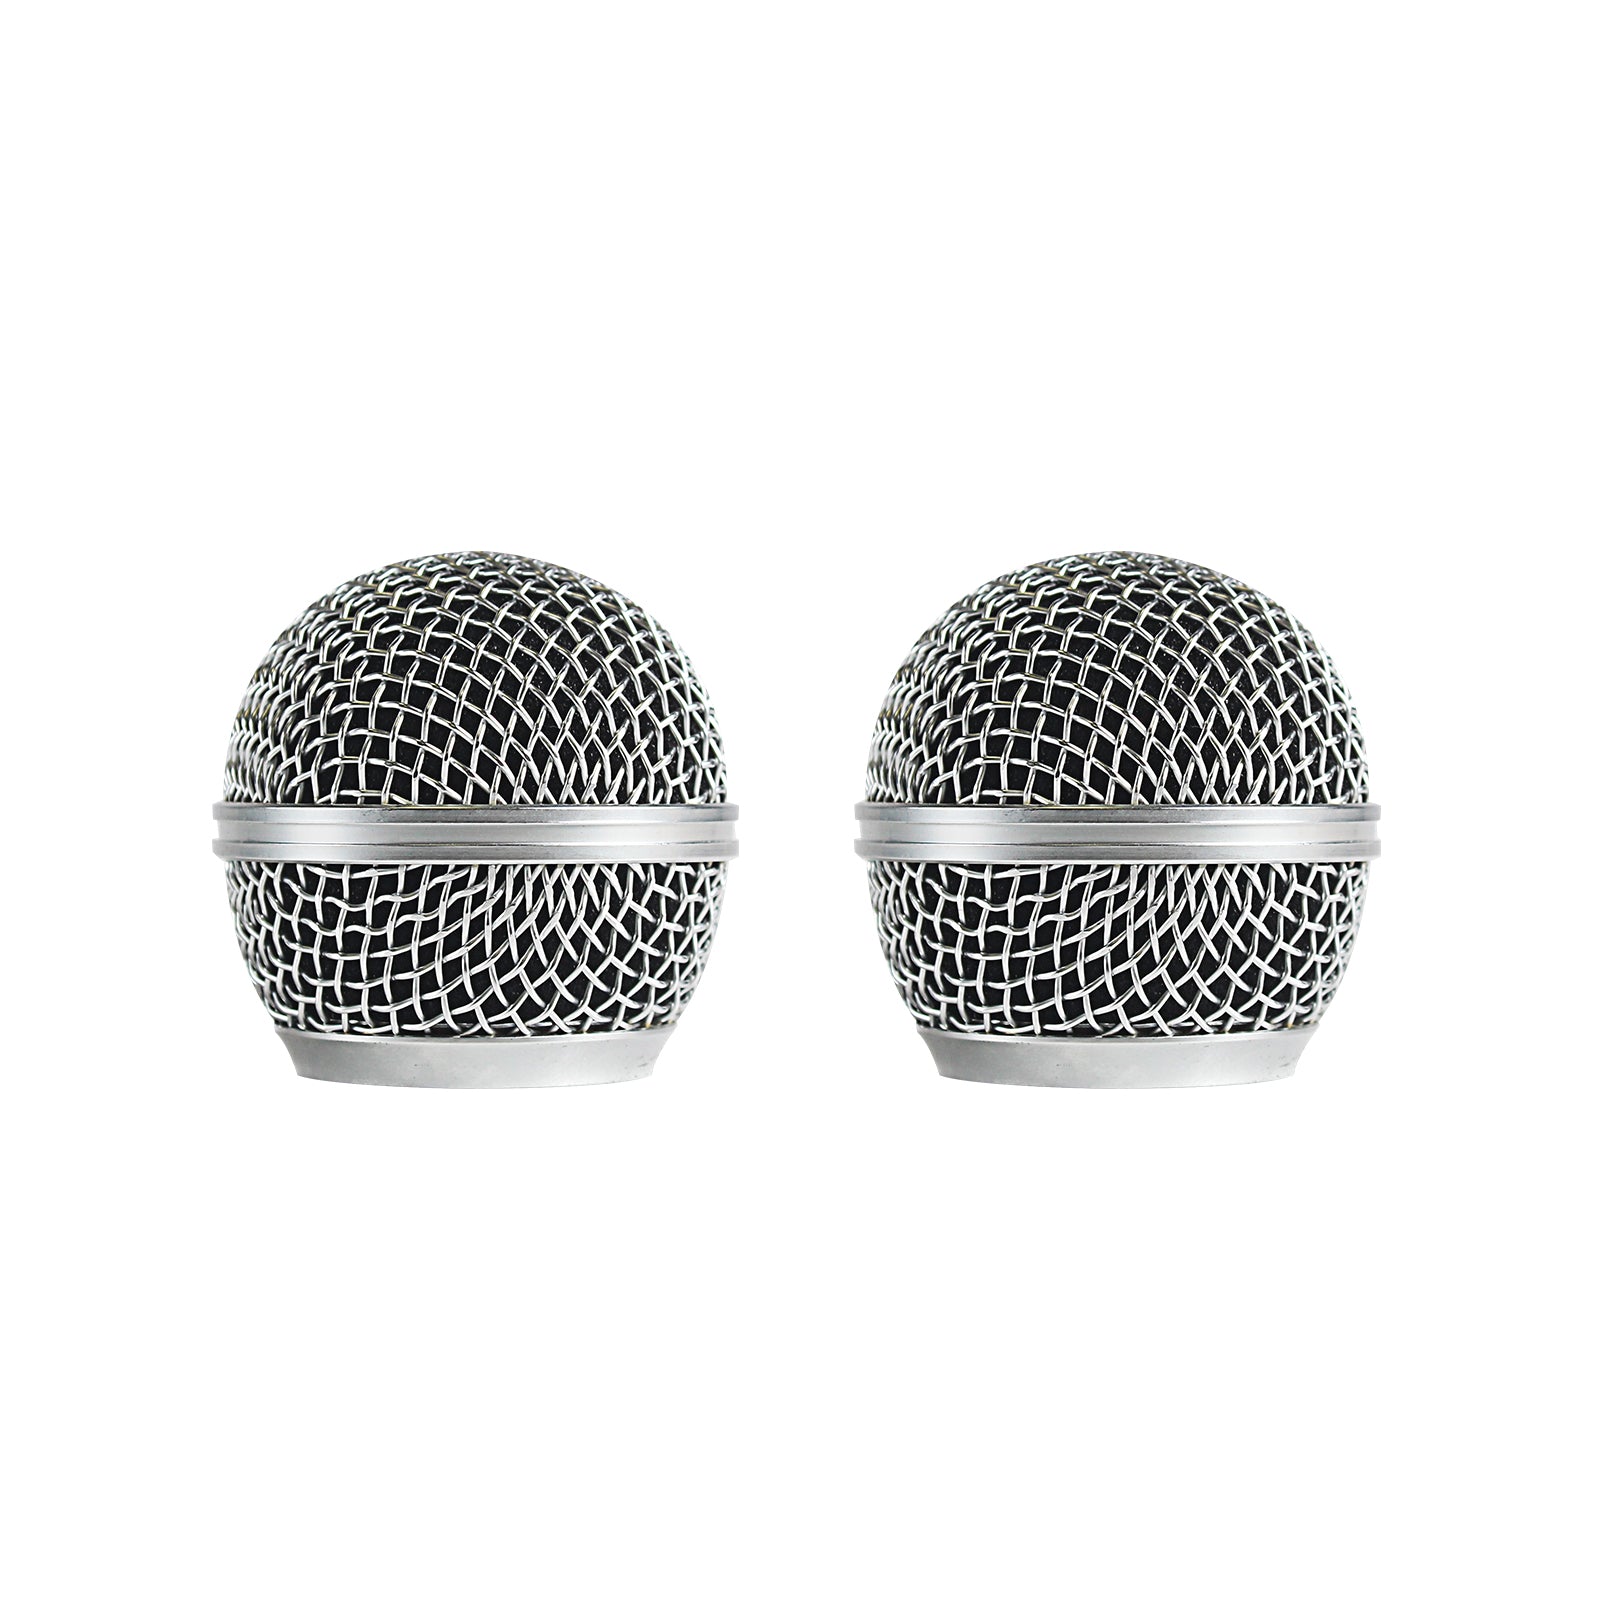 Phenyx Pro Woven Mesh Silver Microphone Grille for Phenyx Pro PTU-52 (Pack of 2)